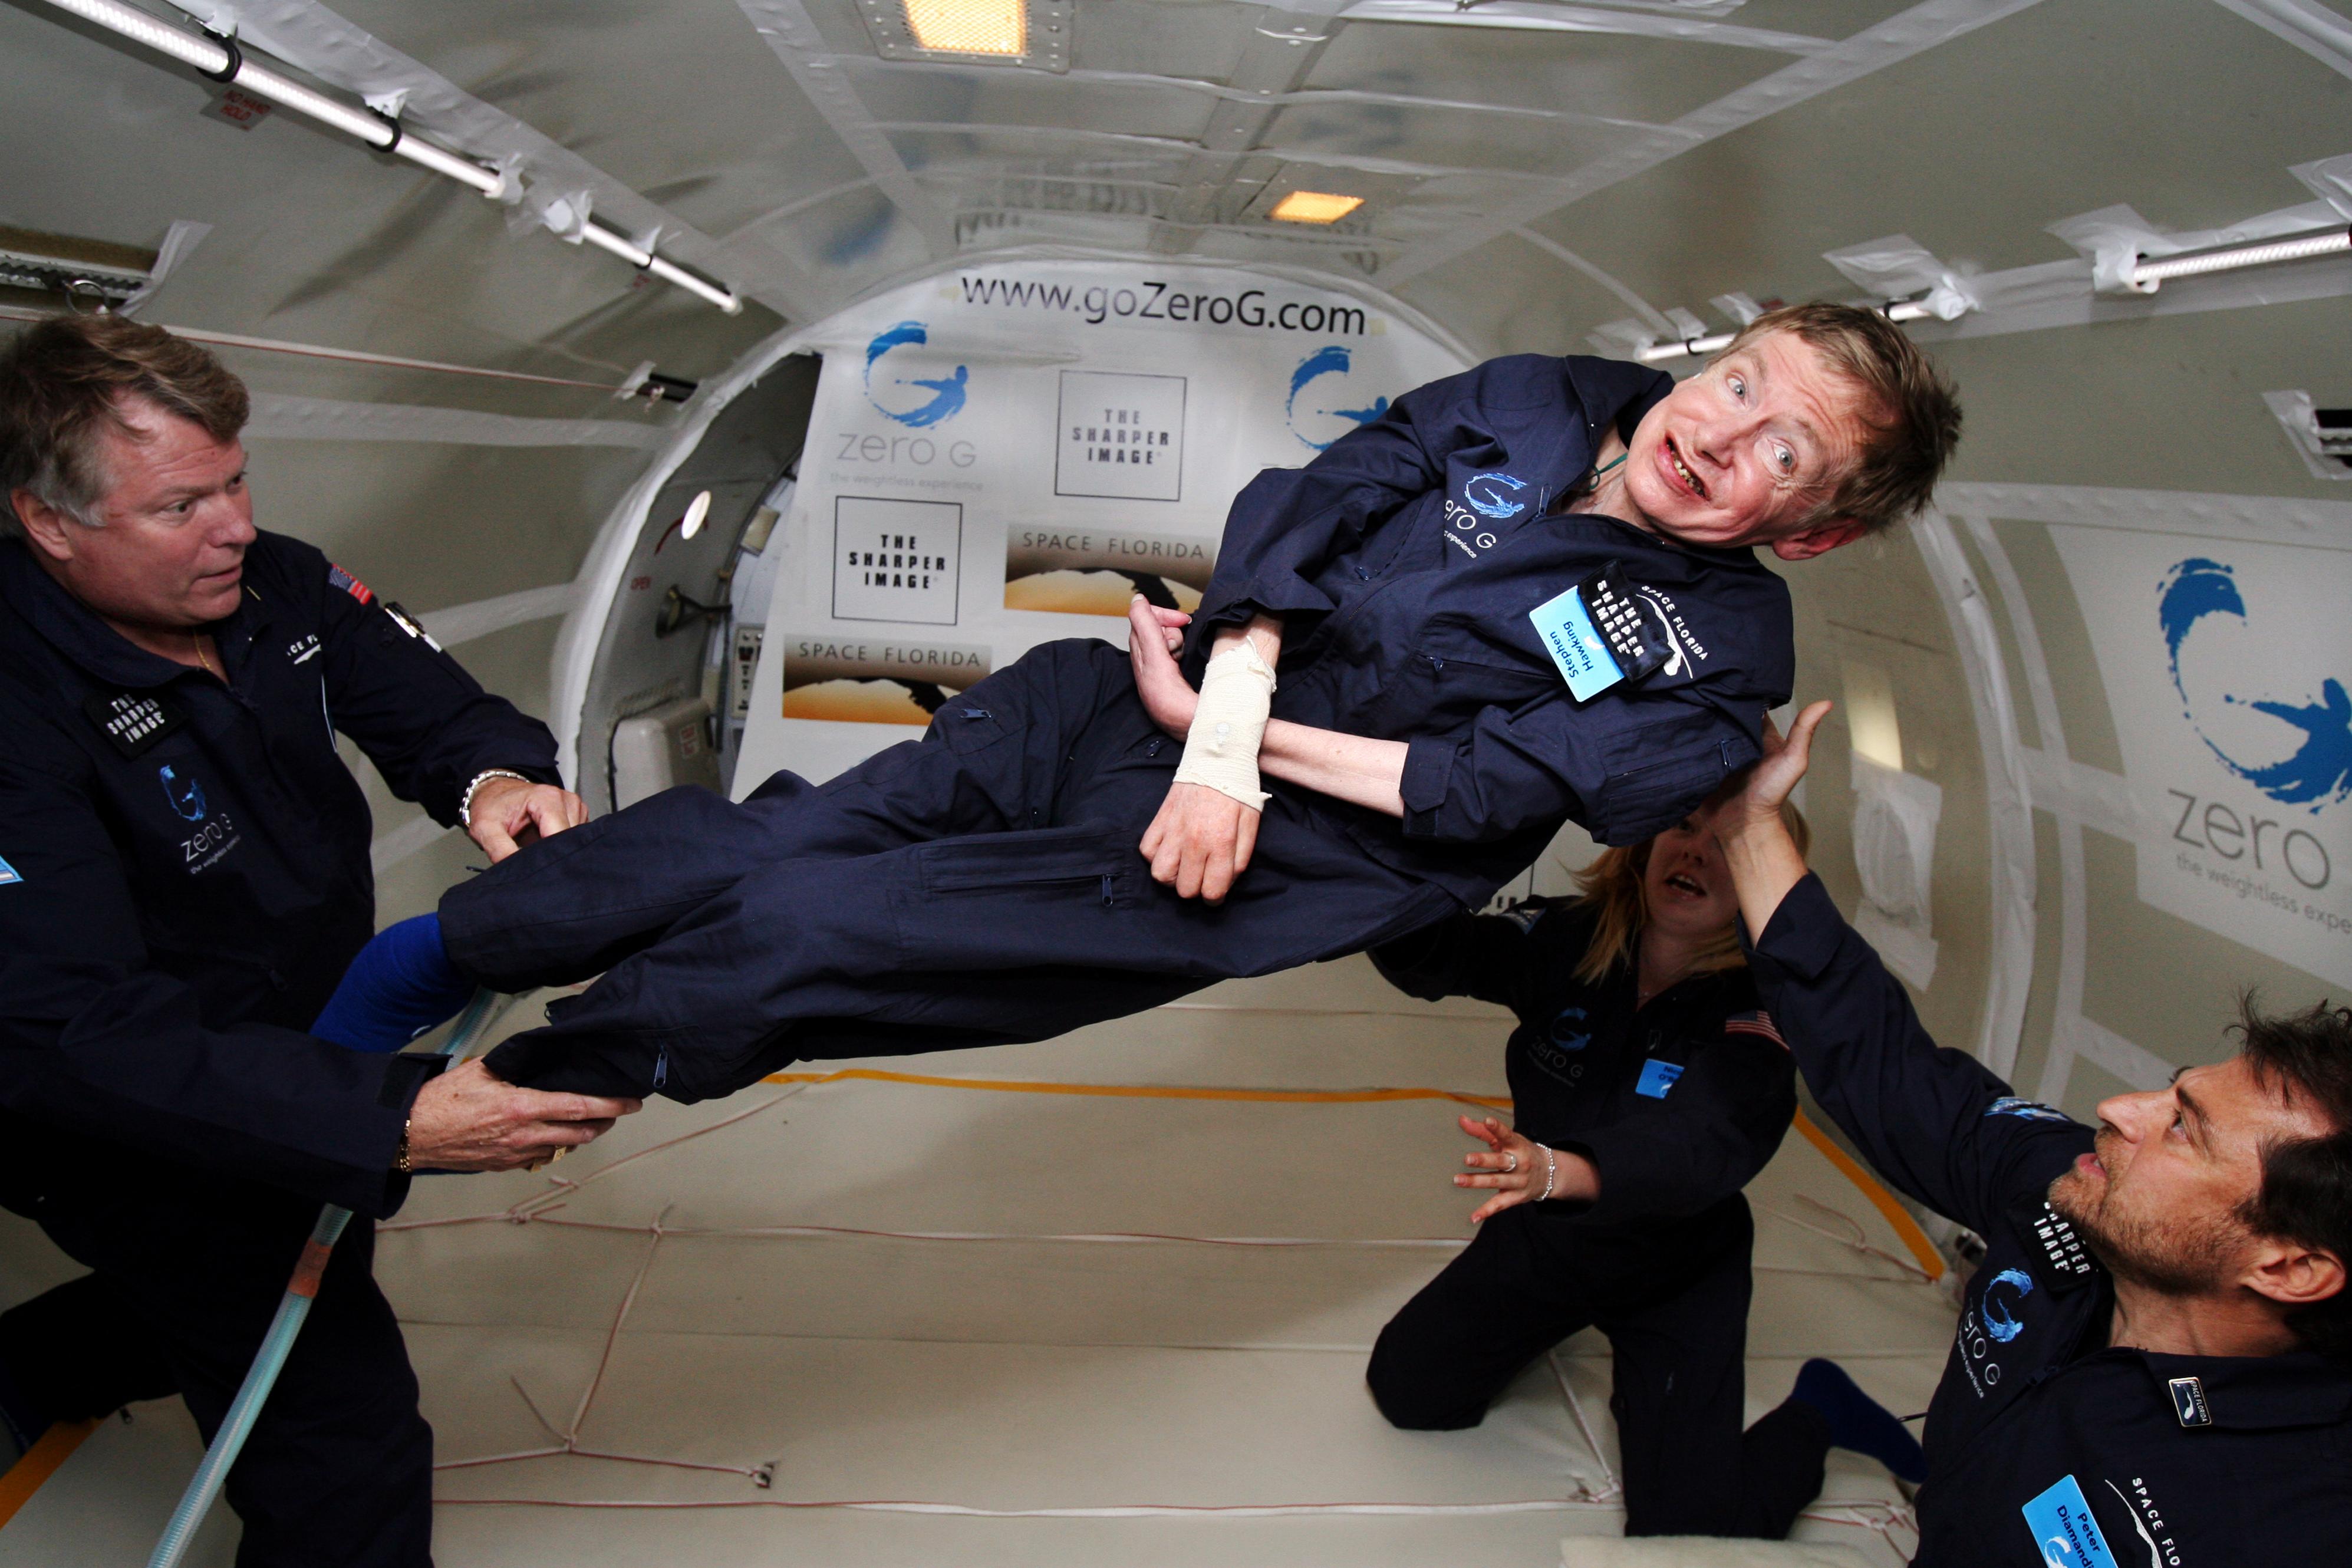 picture of hawking in space